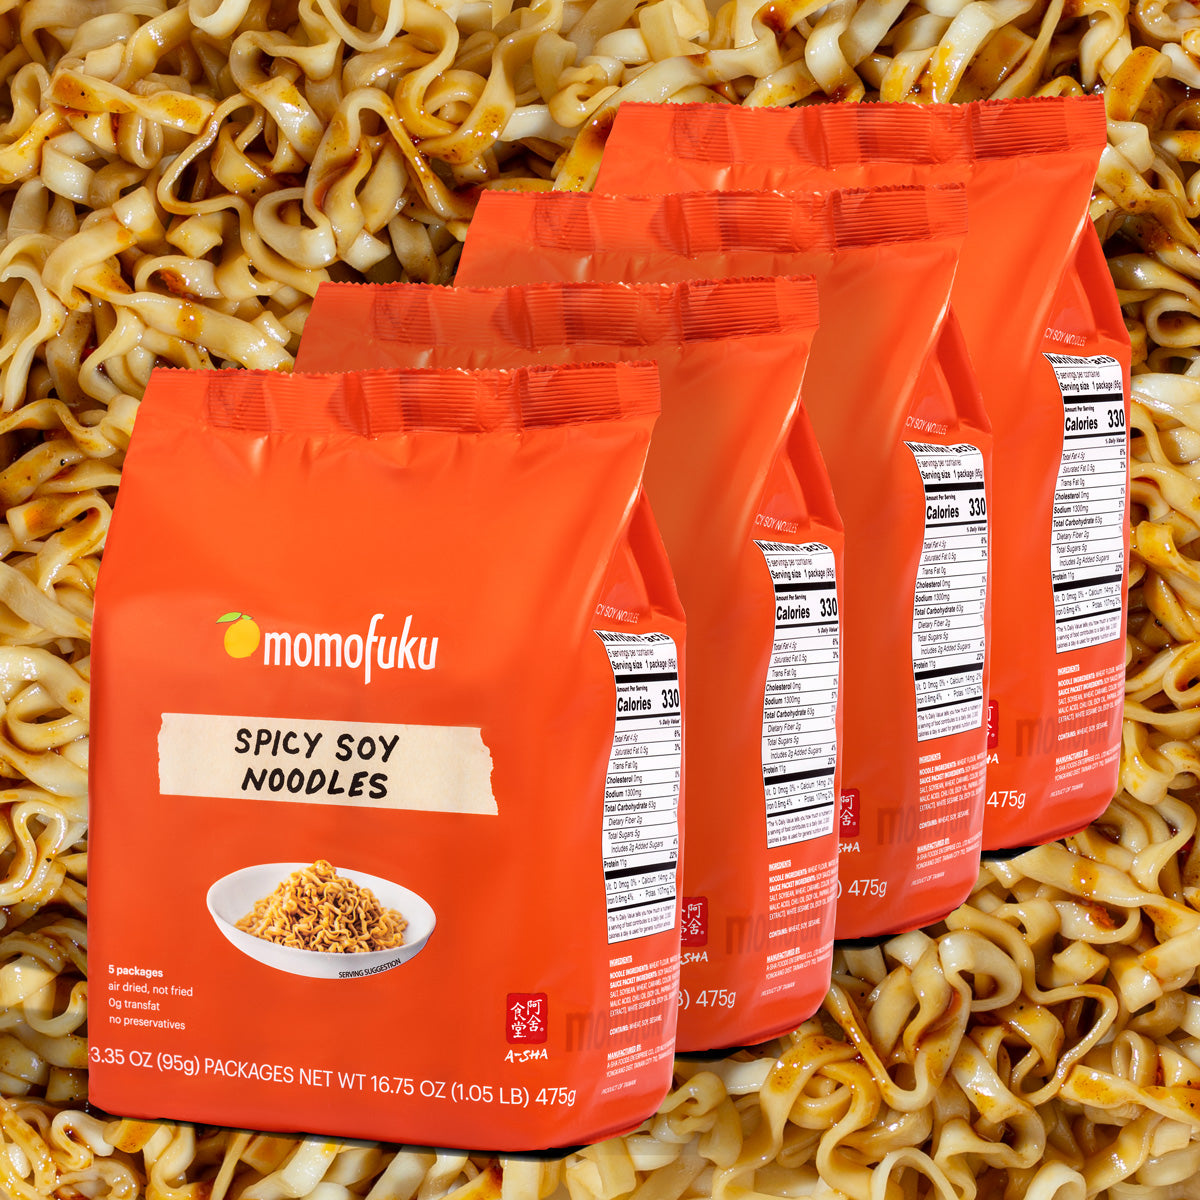 4 packs of spicy soy noodles